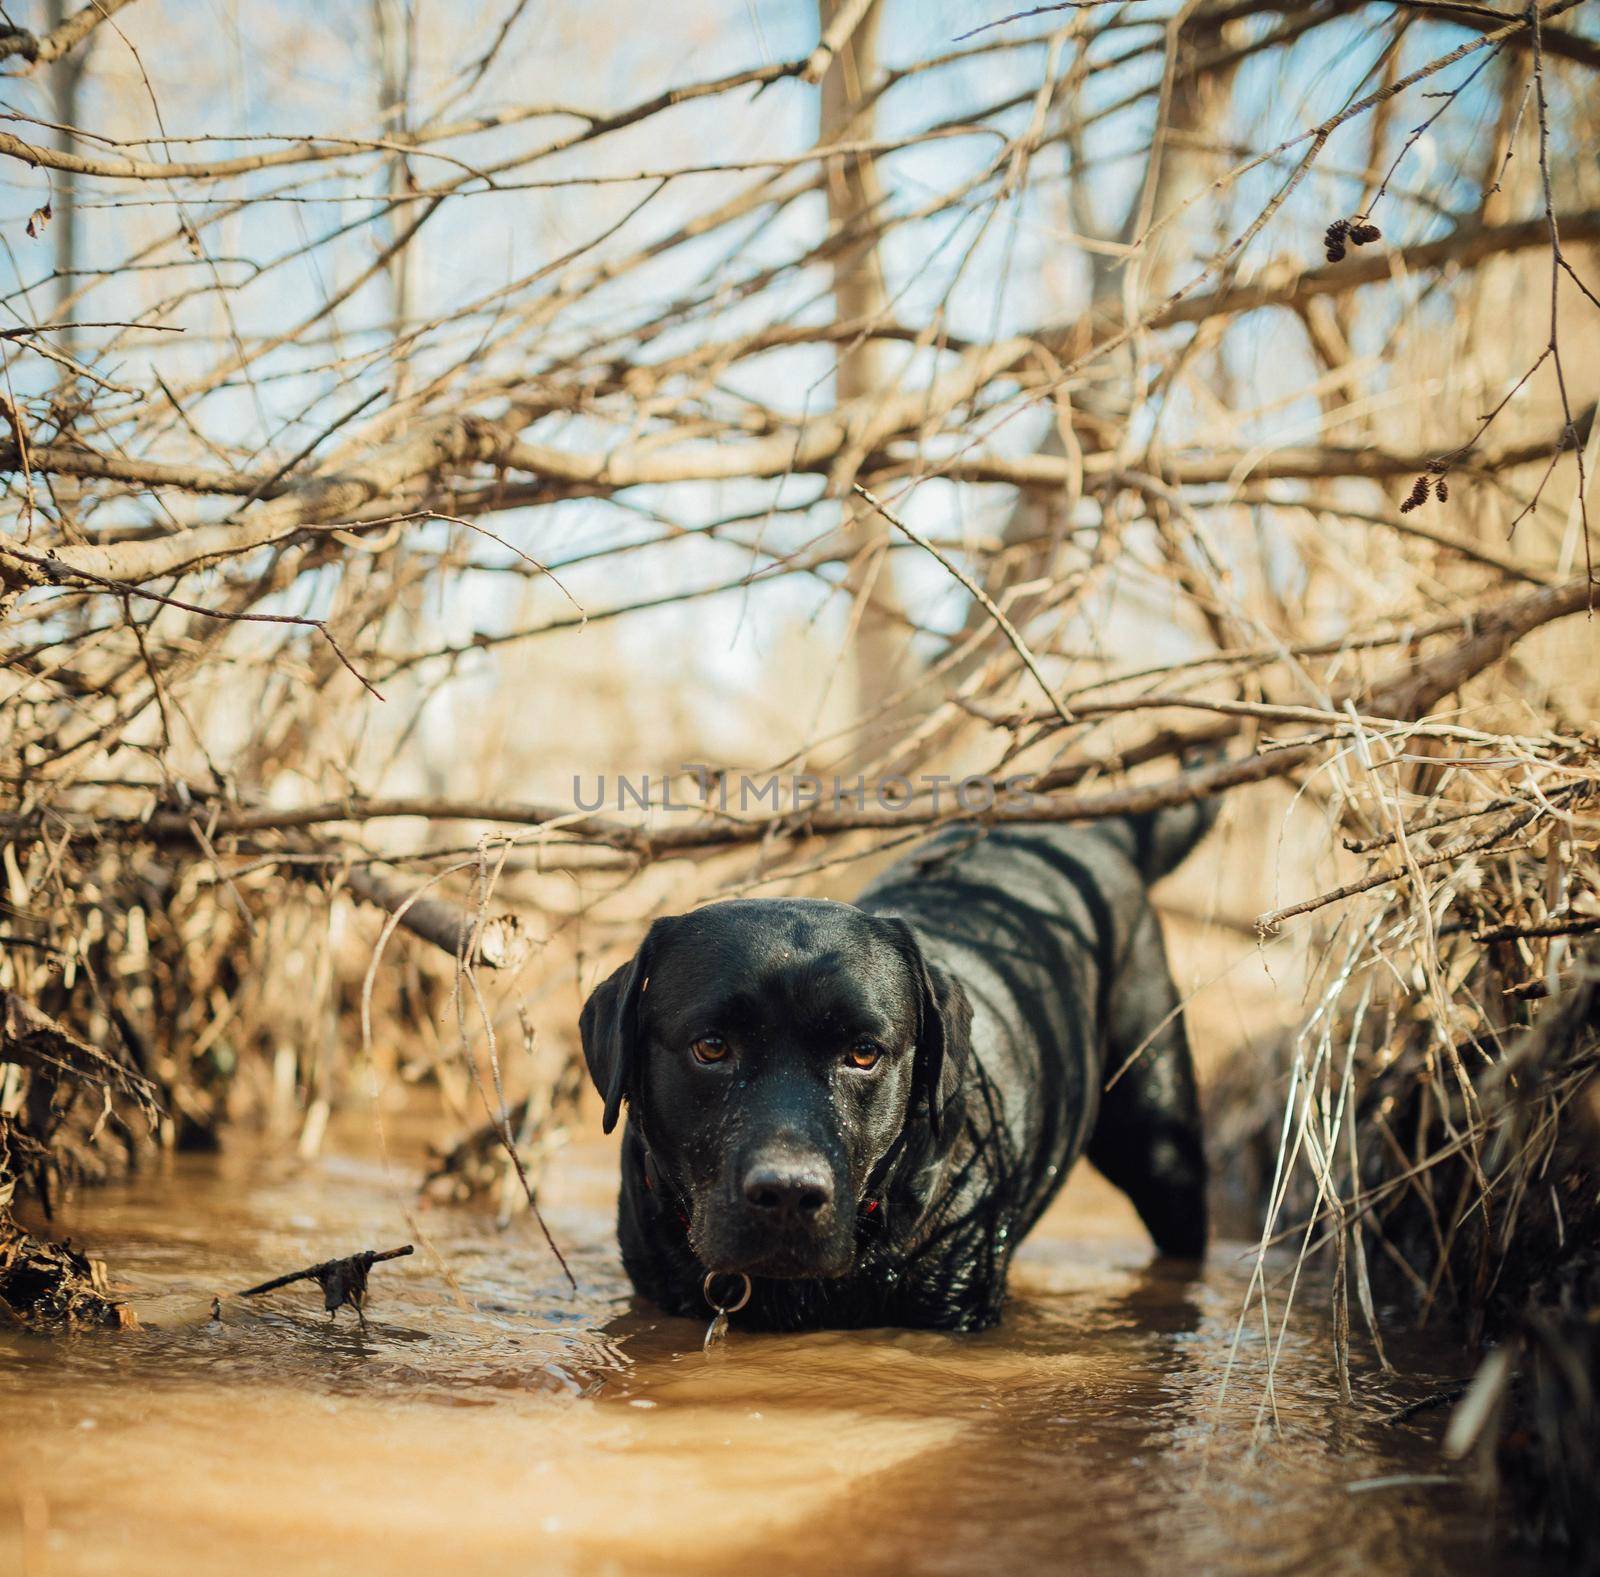 Black labrador retriever playing in a puddle of water, wet and muddy.